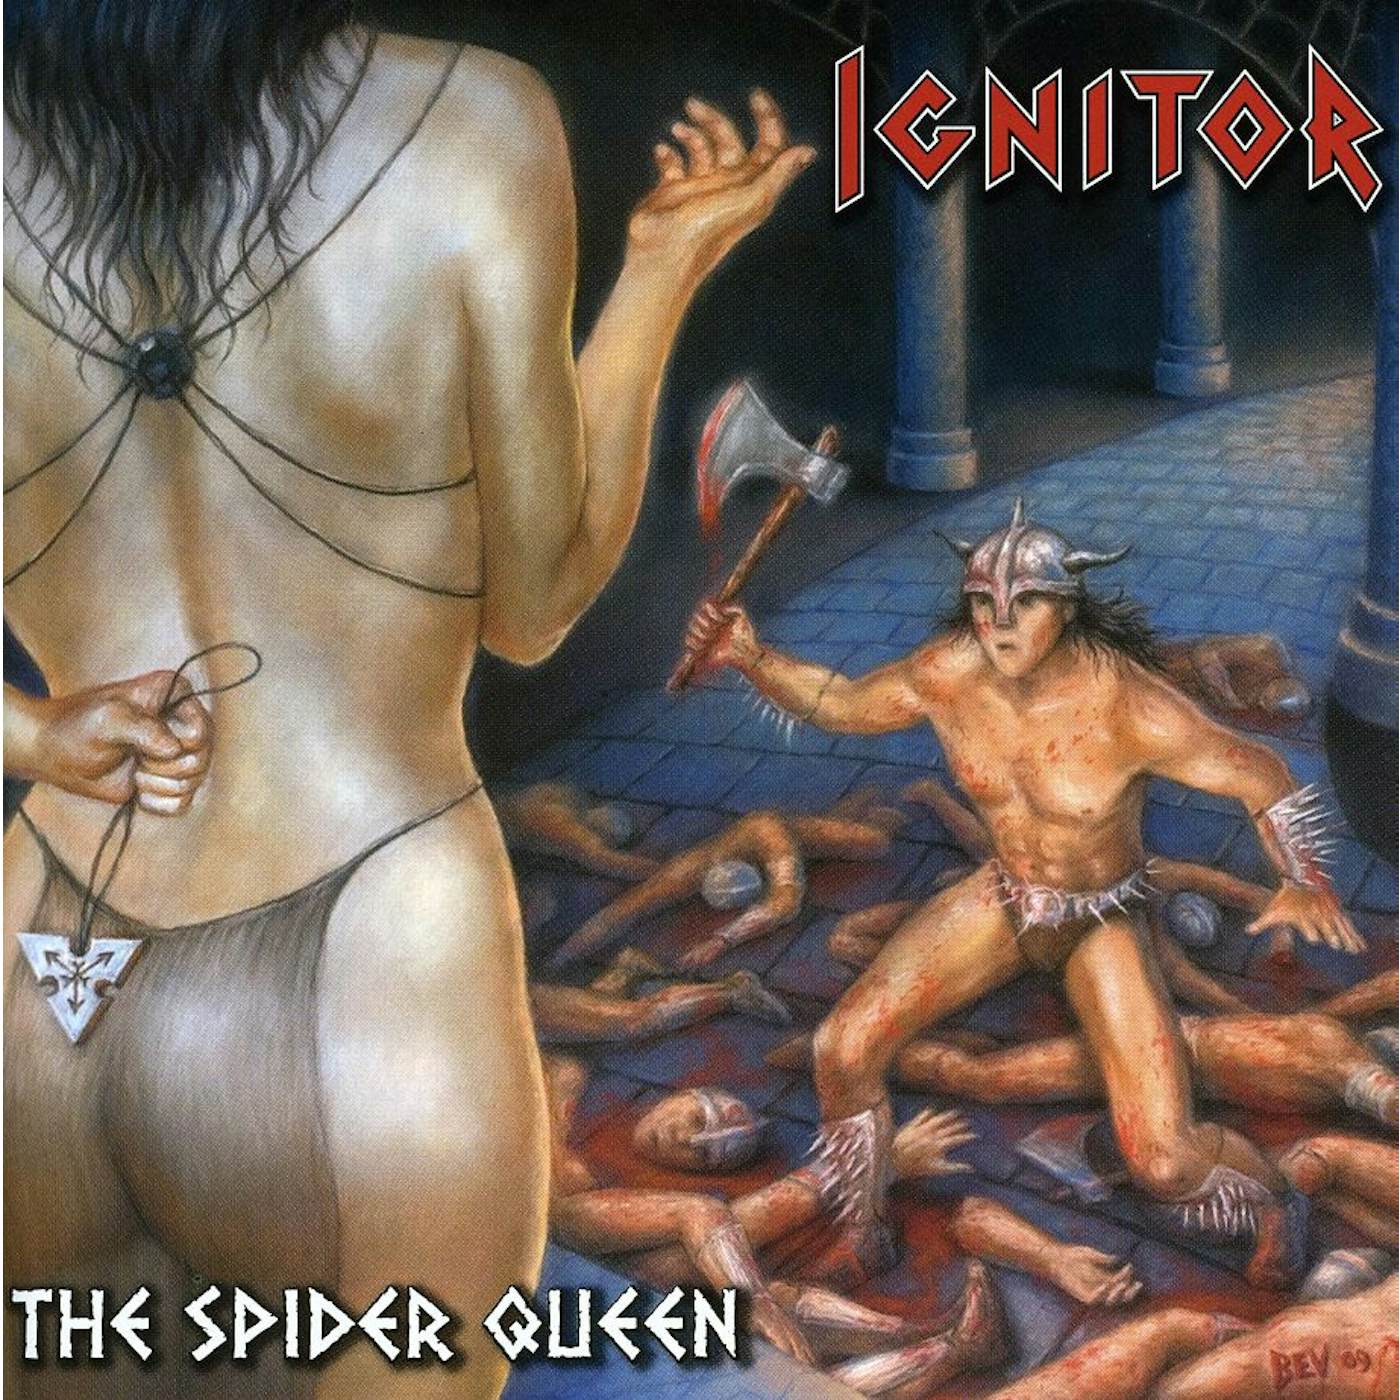 Ignitor SPIDER QUEEN CD